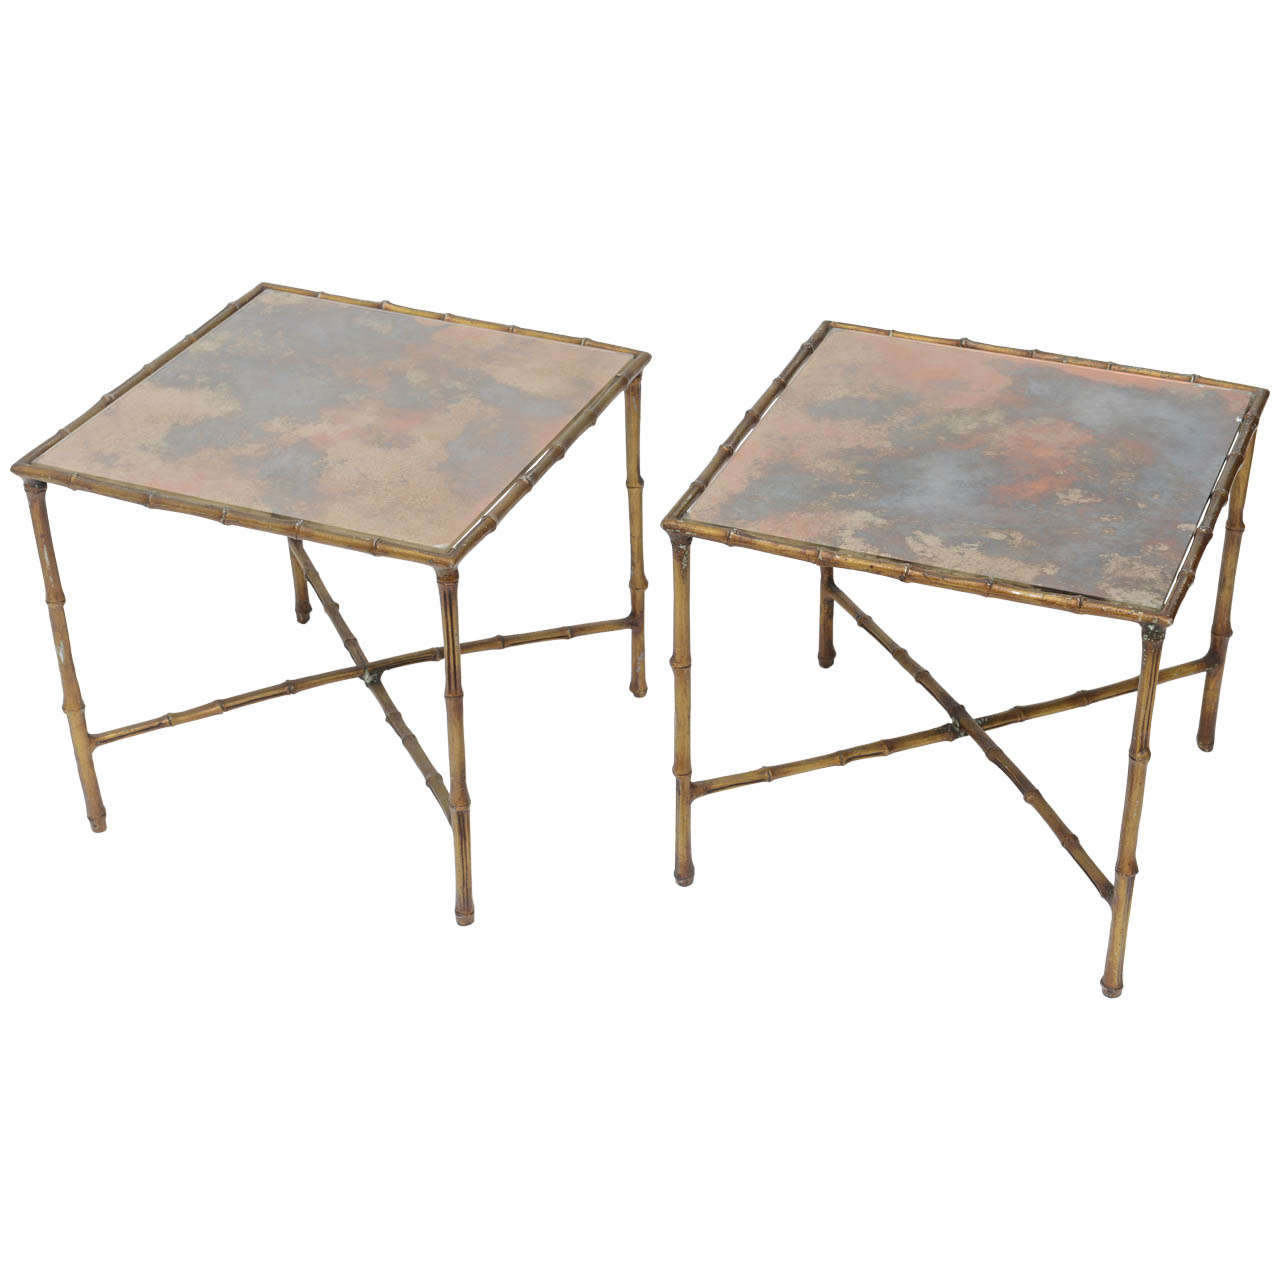 Pair of Eglomisé Painted Side Tables